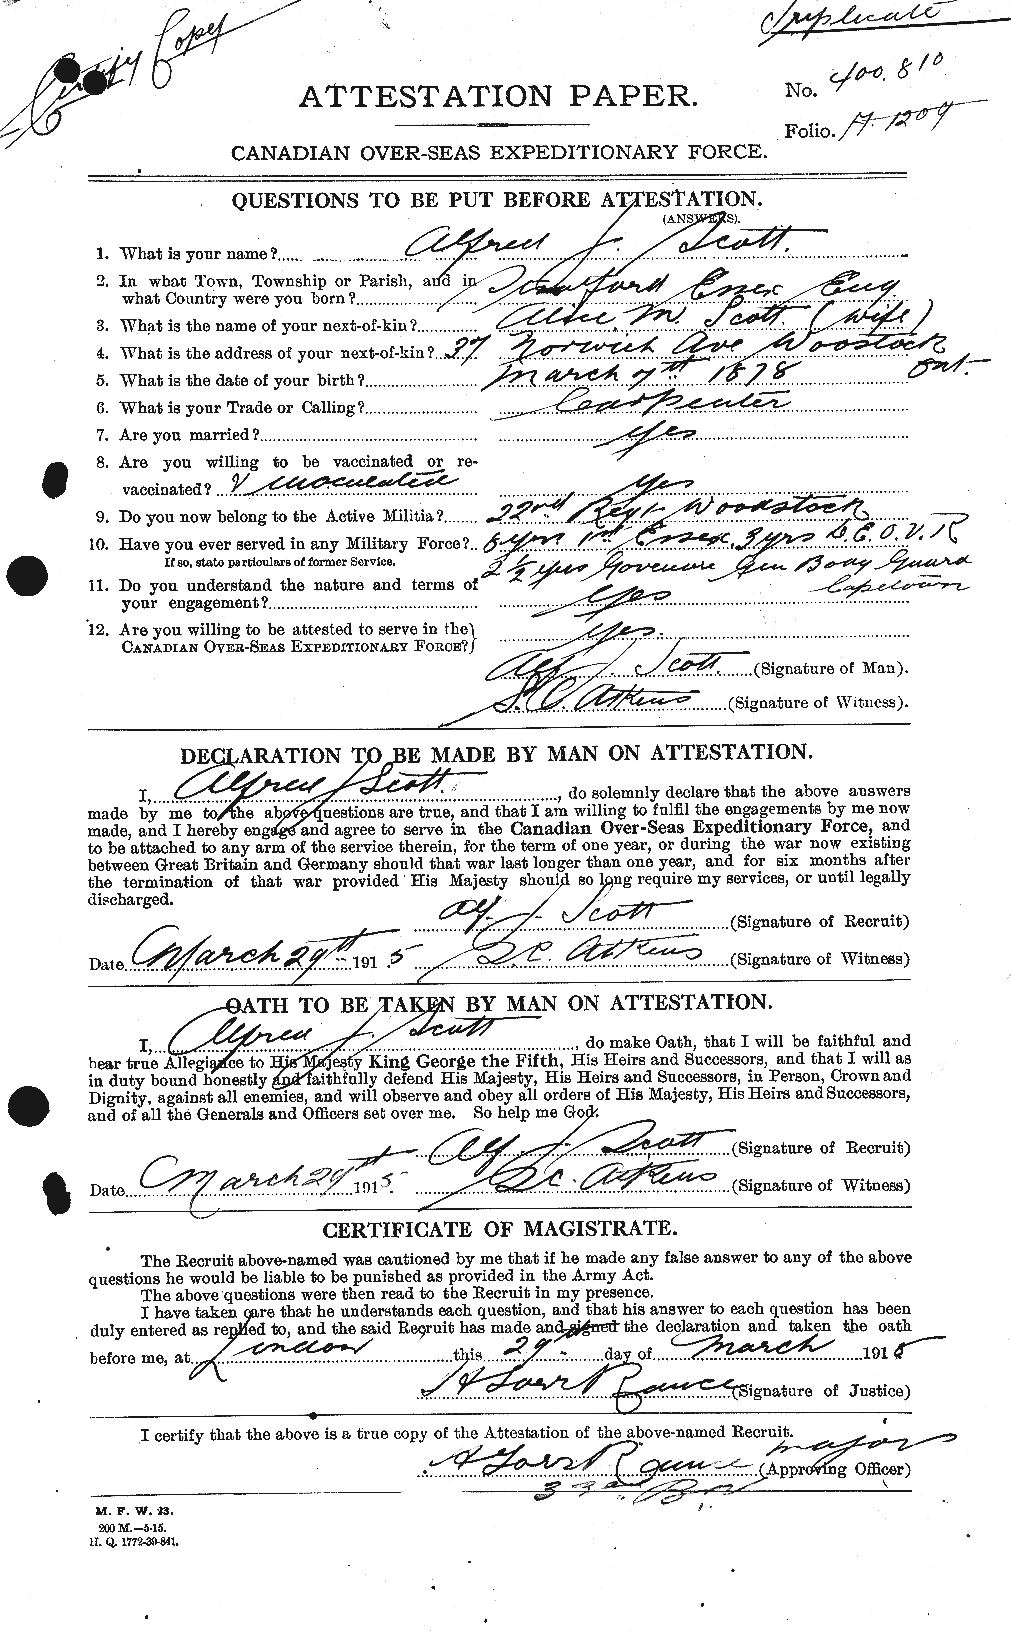 Personnel Records of the First World War - CEF 086582a